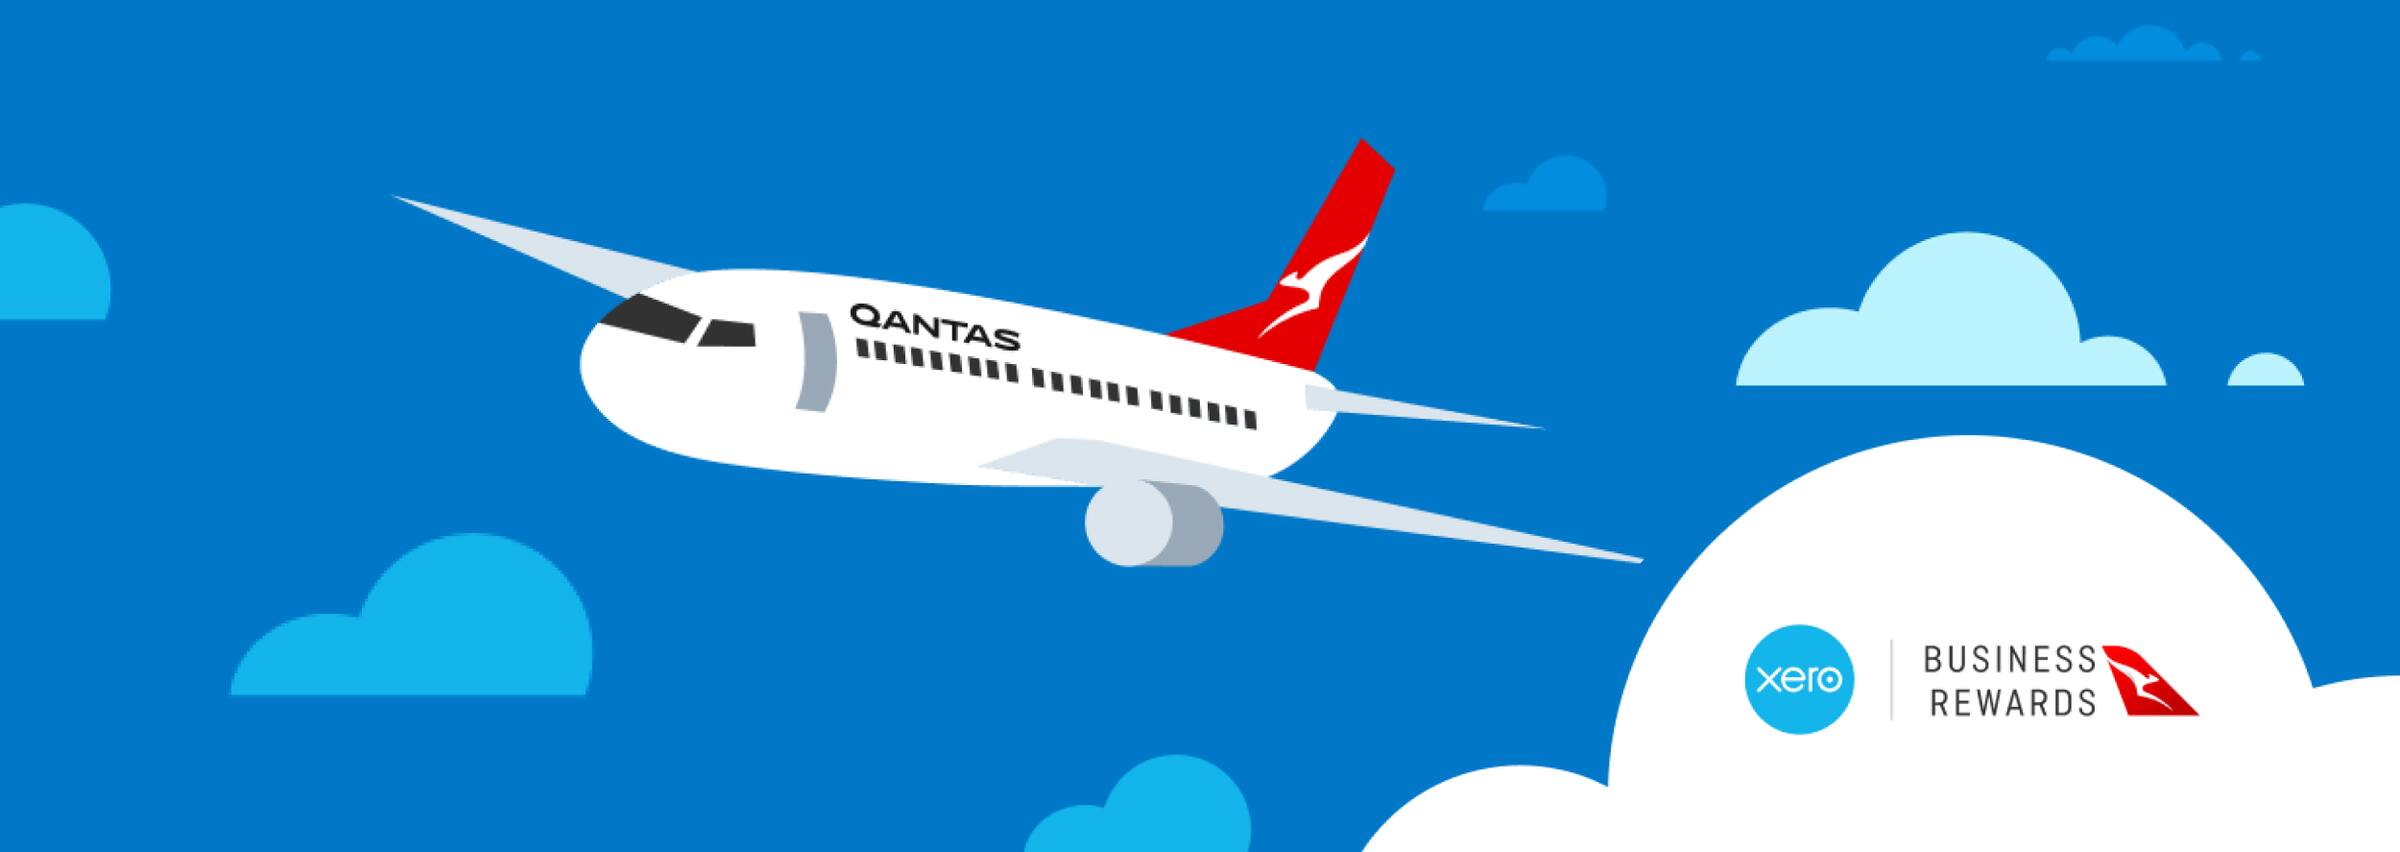 A Qantas plane flying, with the Xero logo and the words 'Business rewards'